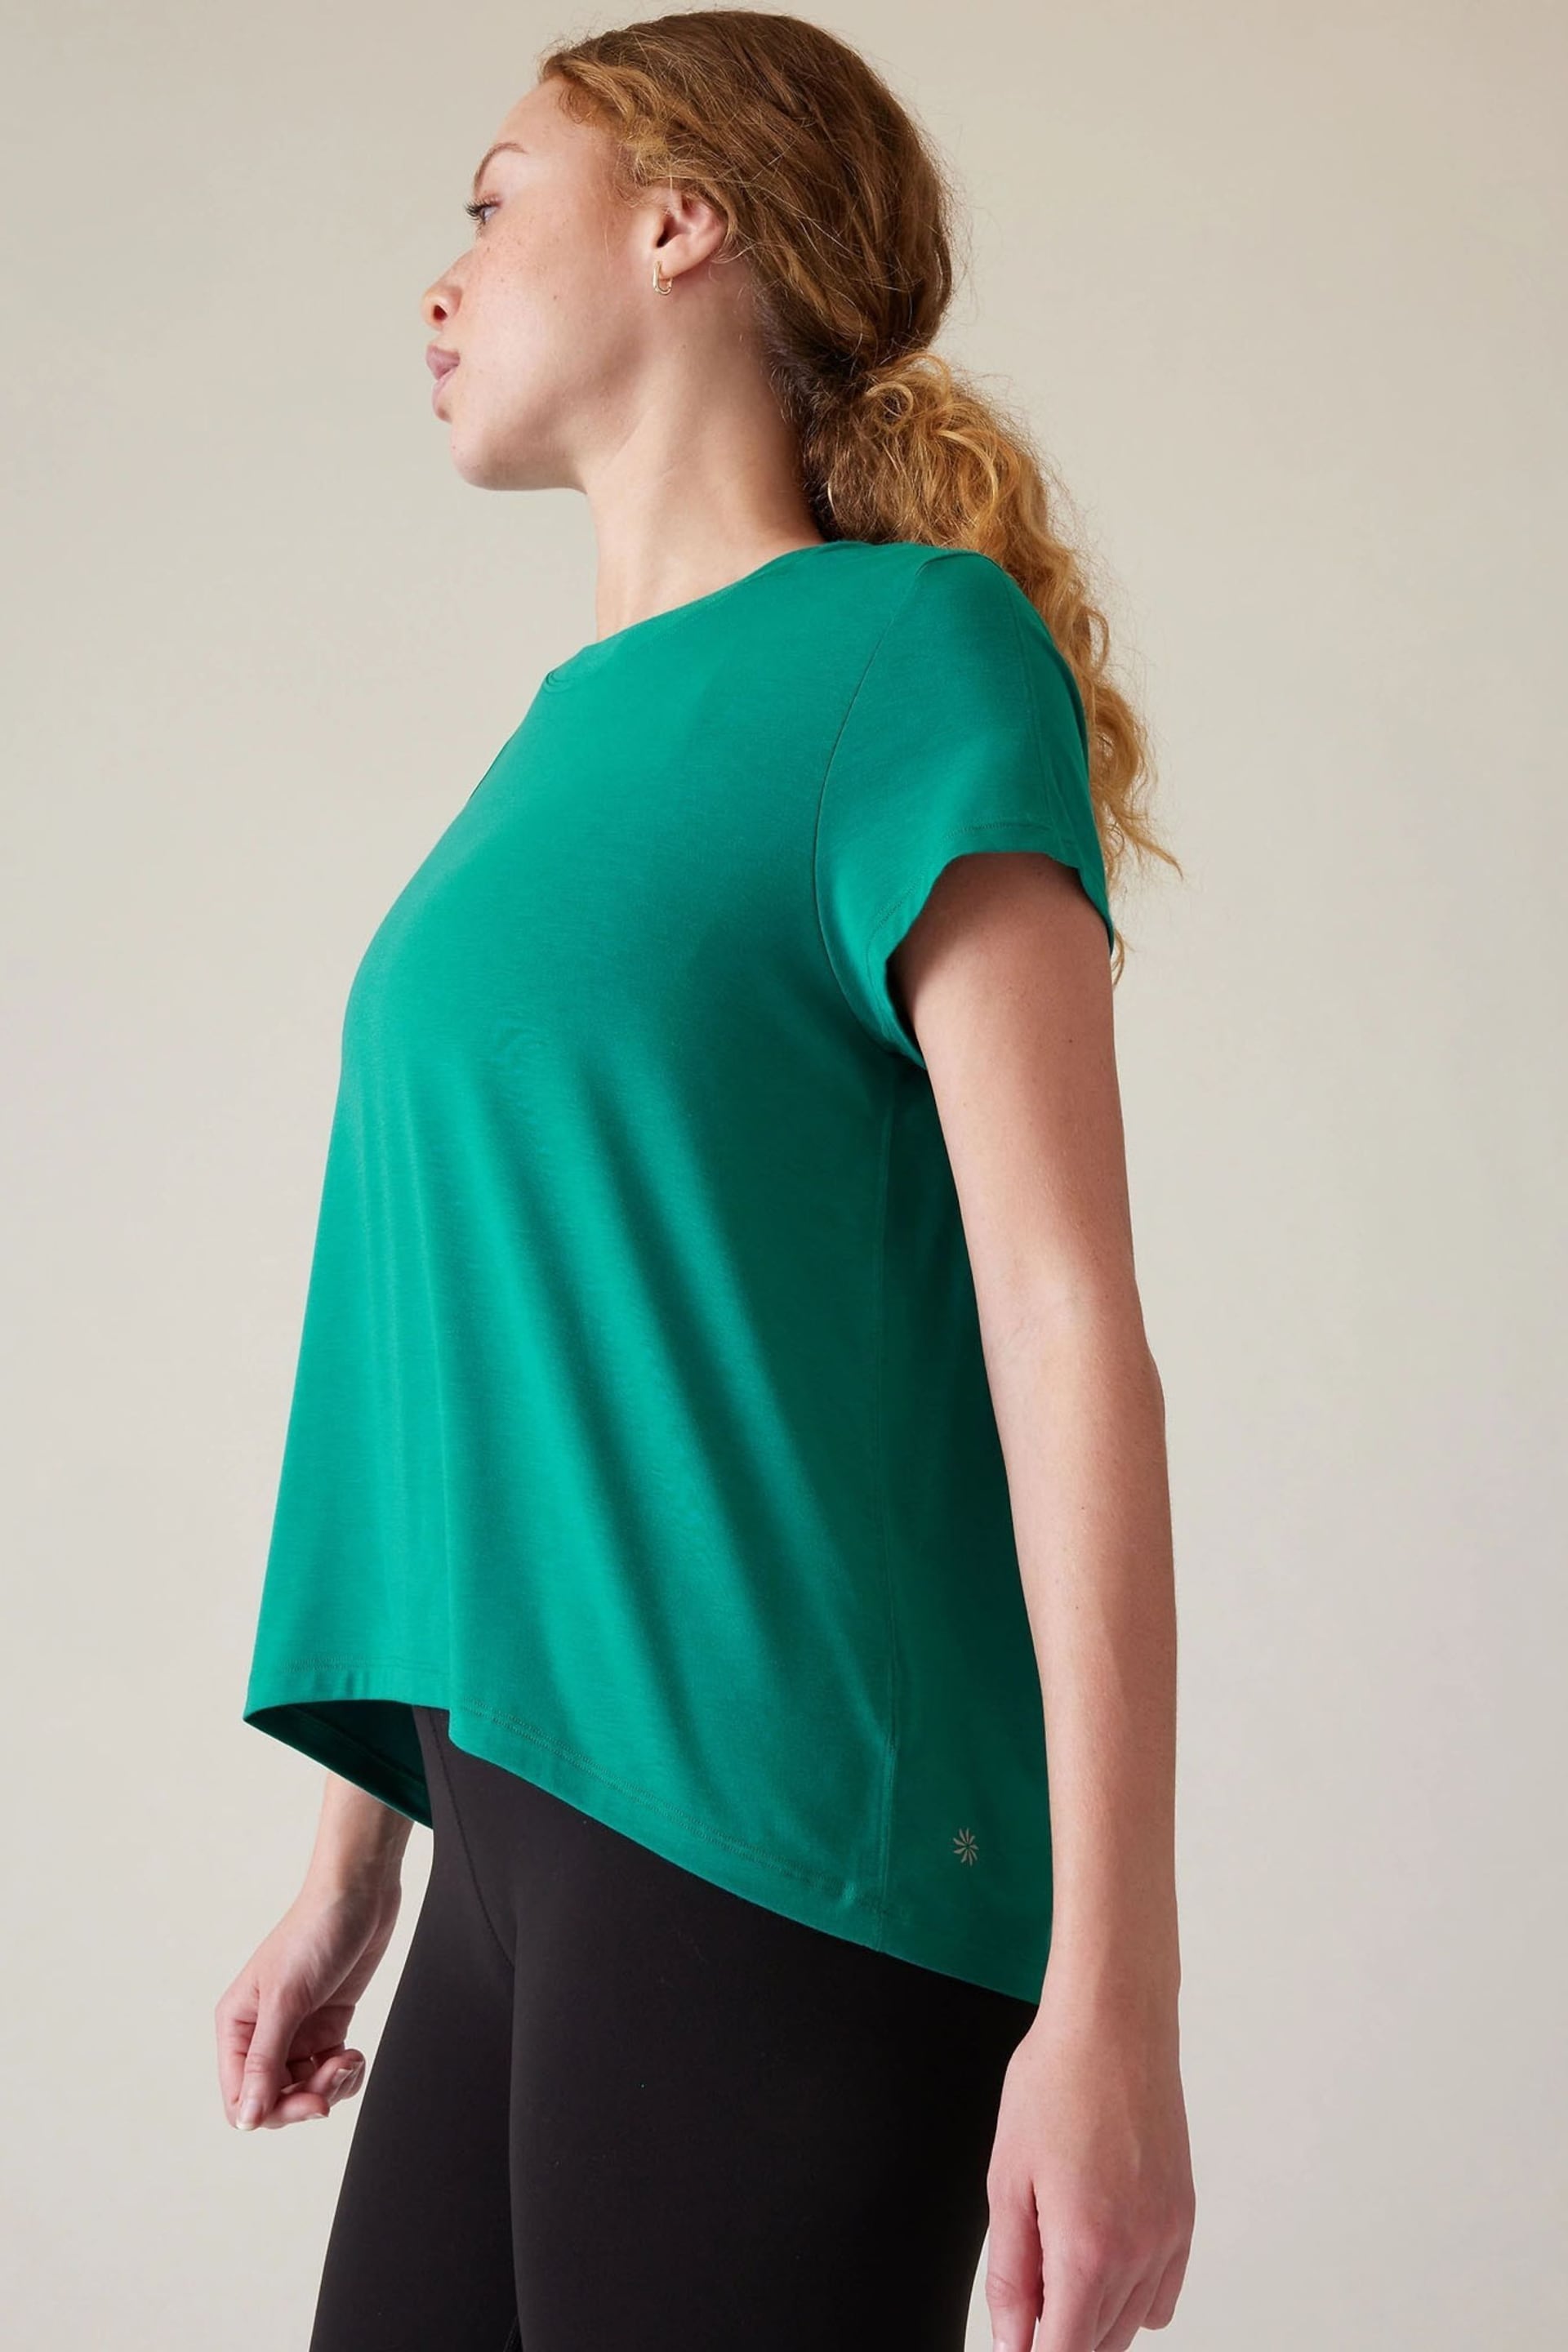 Athleta Green With Ease T-Shirt - Image 3 of 6